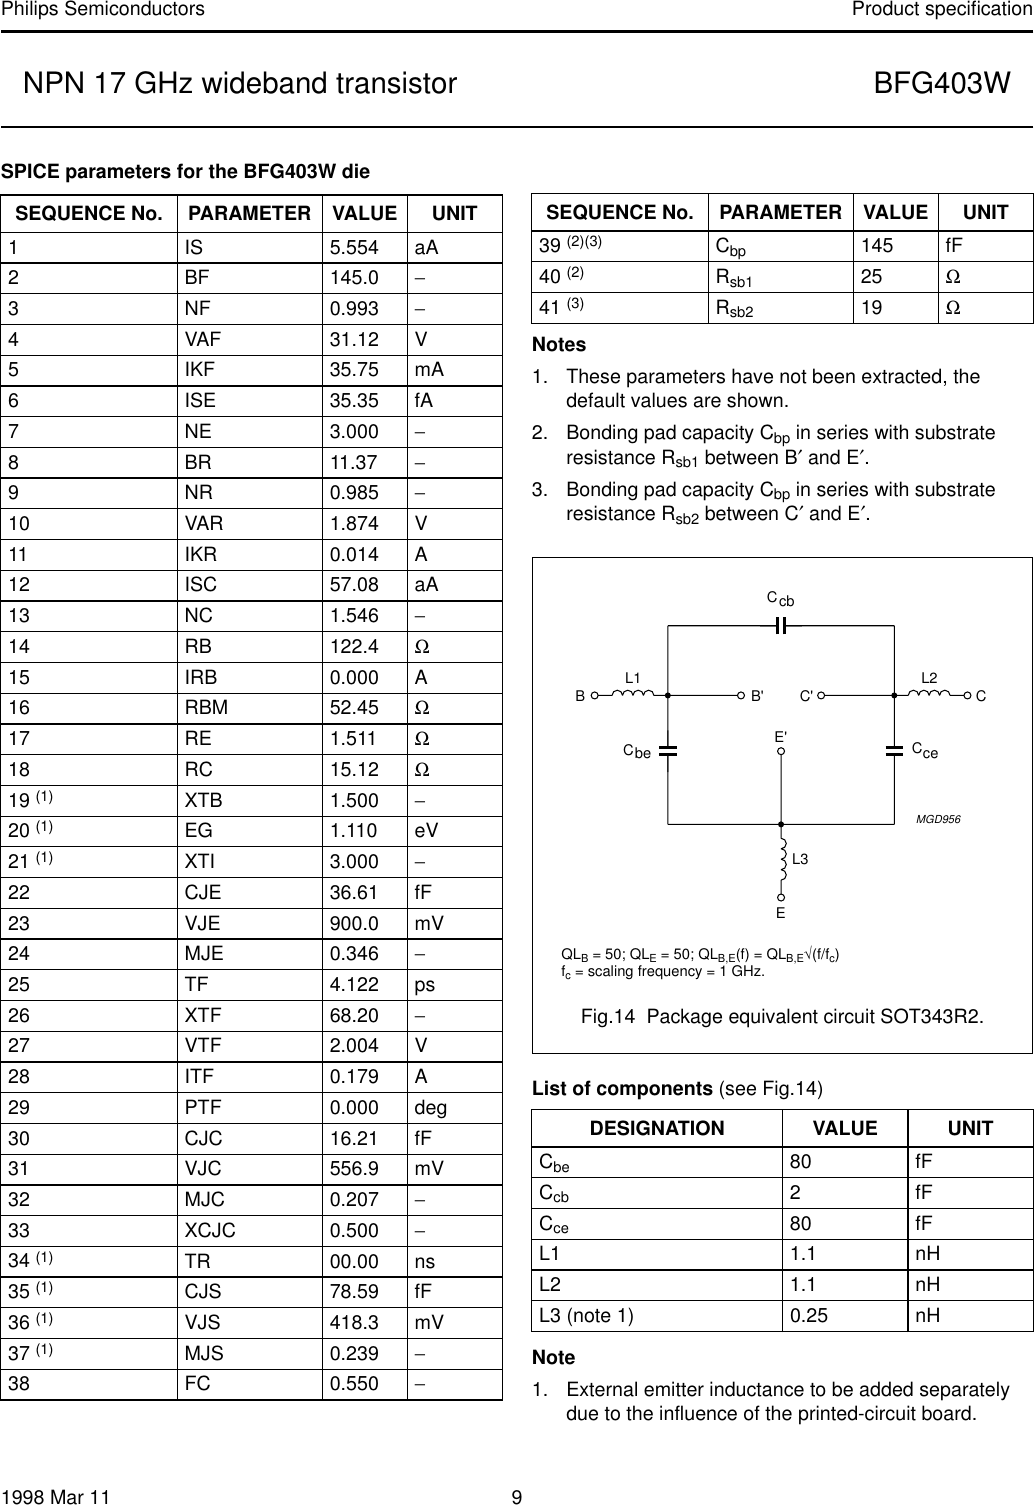 Page 9 of 12 - NPN 17 GHz Wideband Transistor Bfg403w Philips